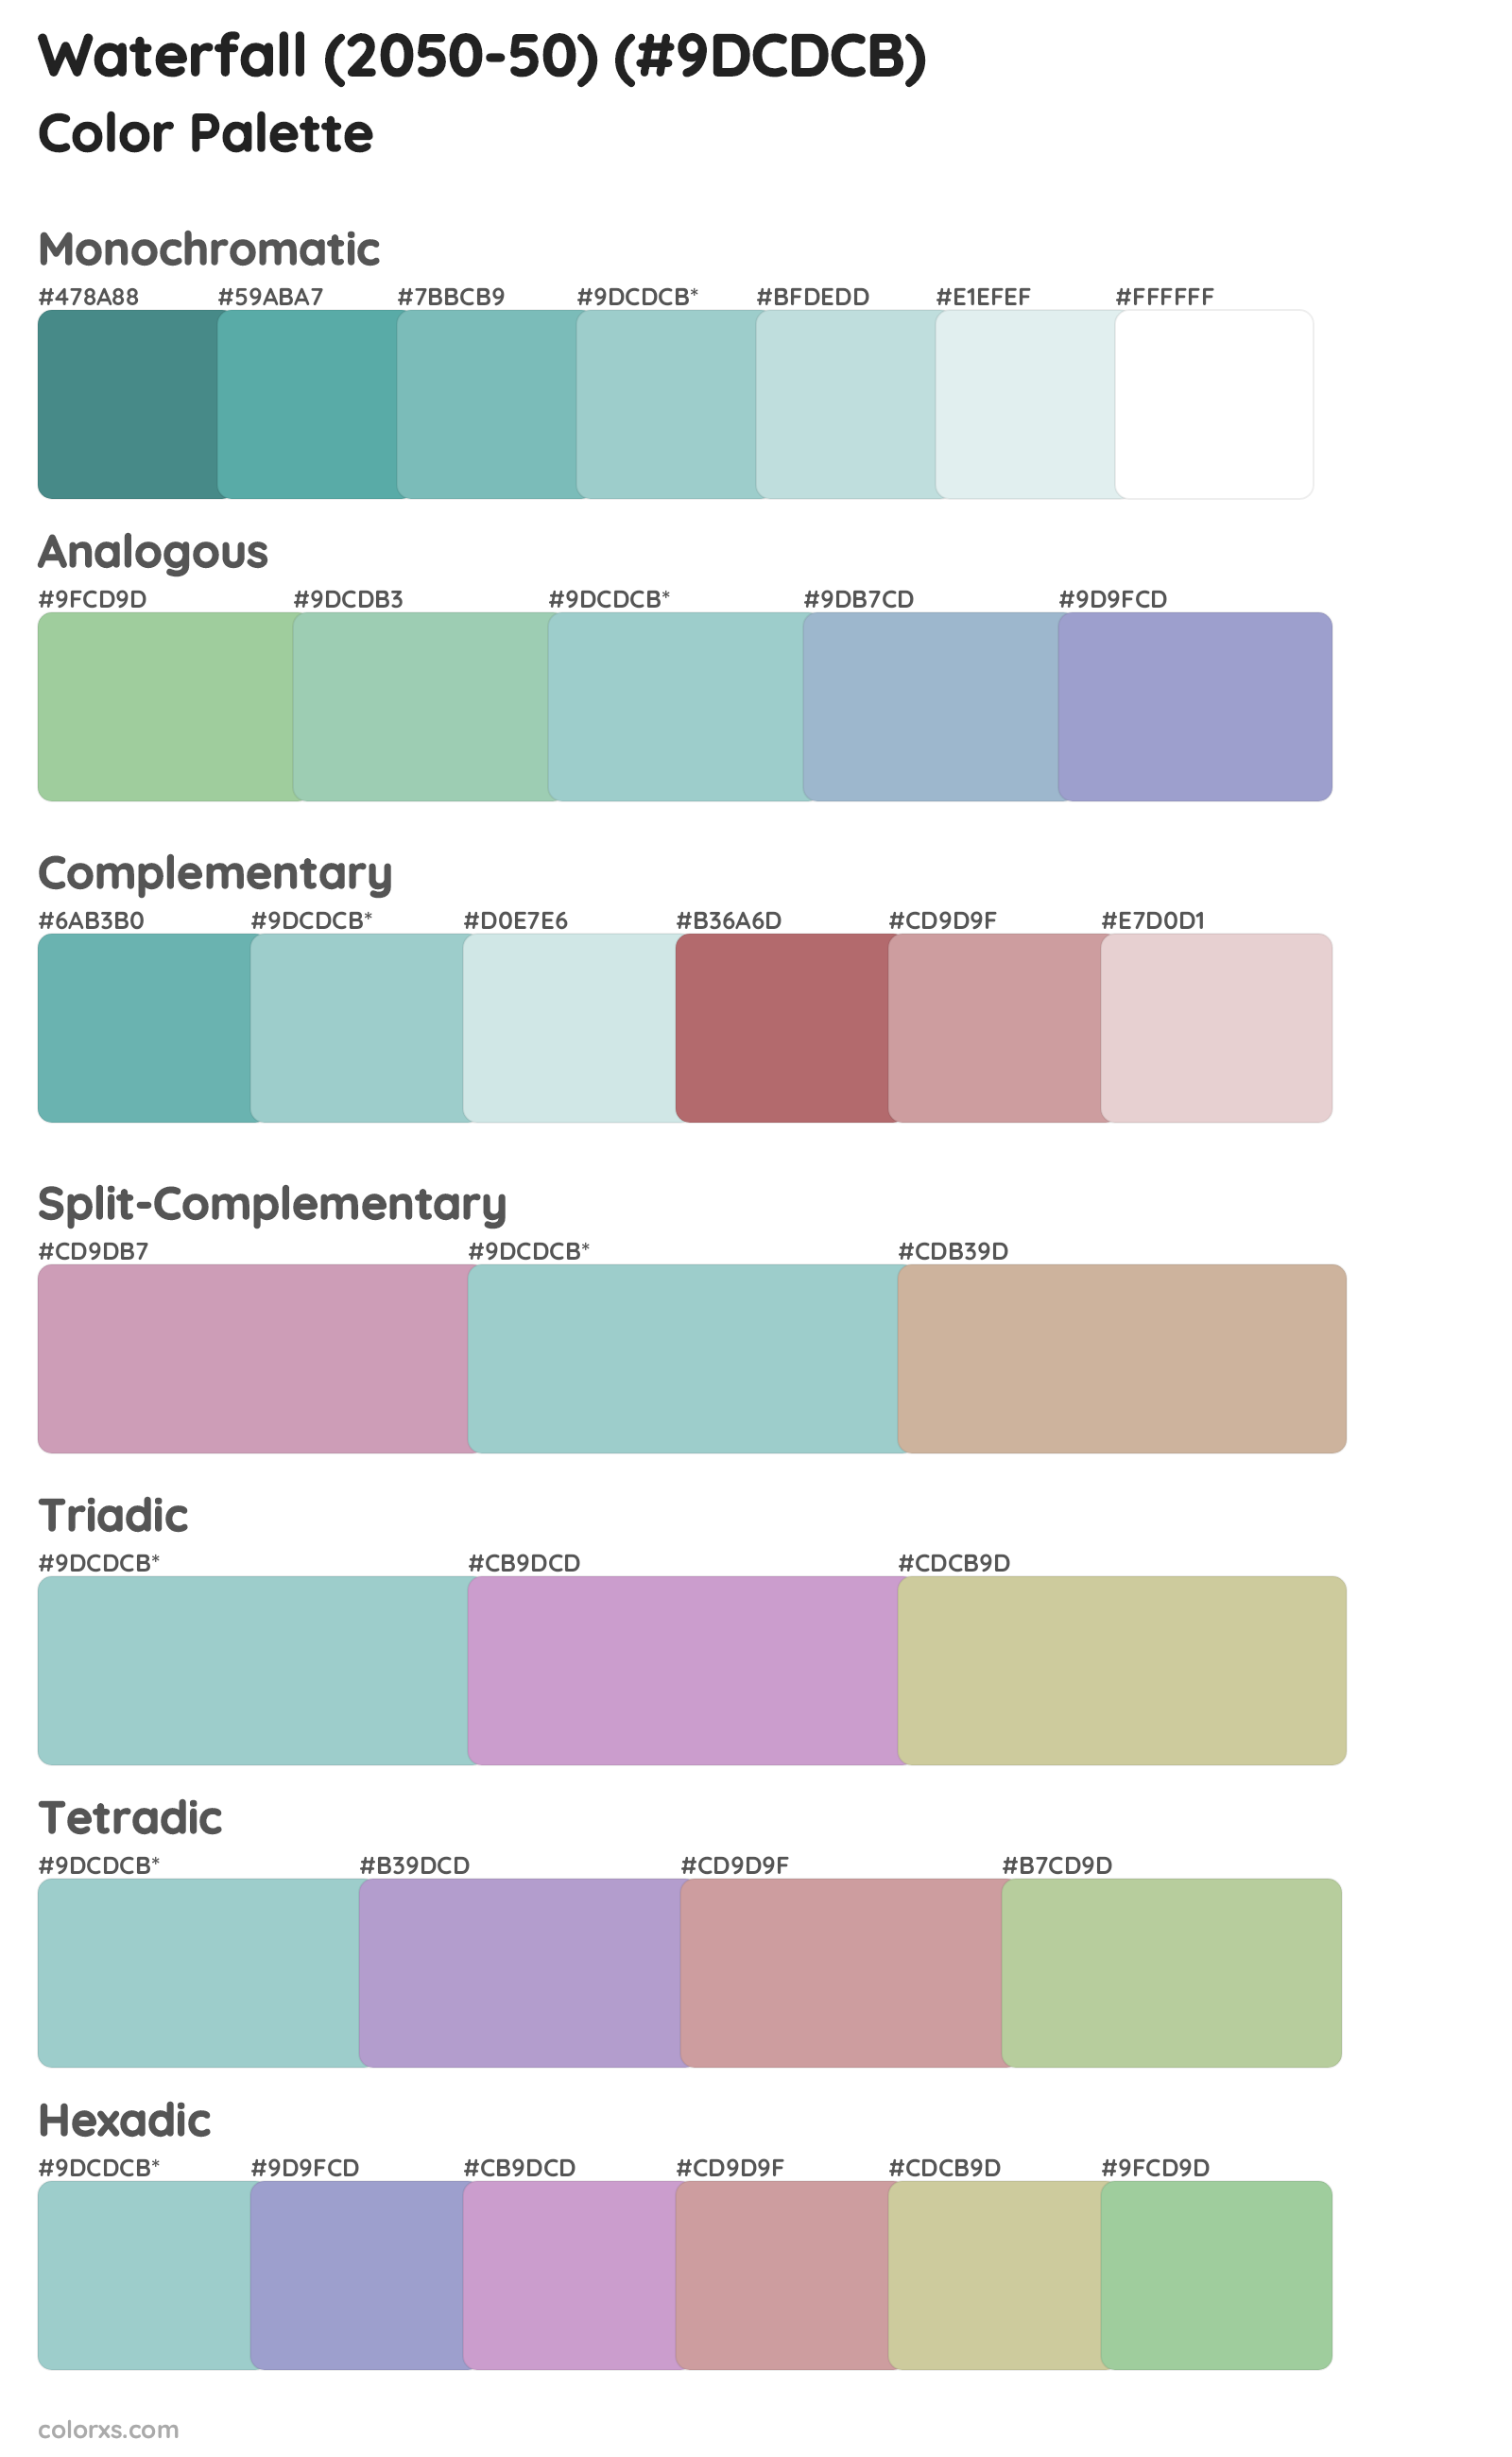 Waterfall (2050-50) Color Scheme Palettes